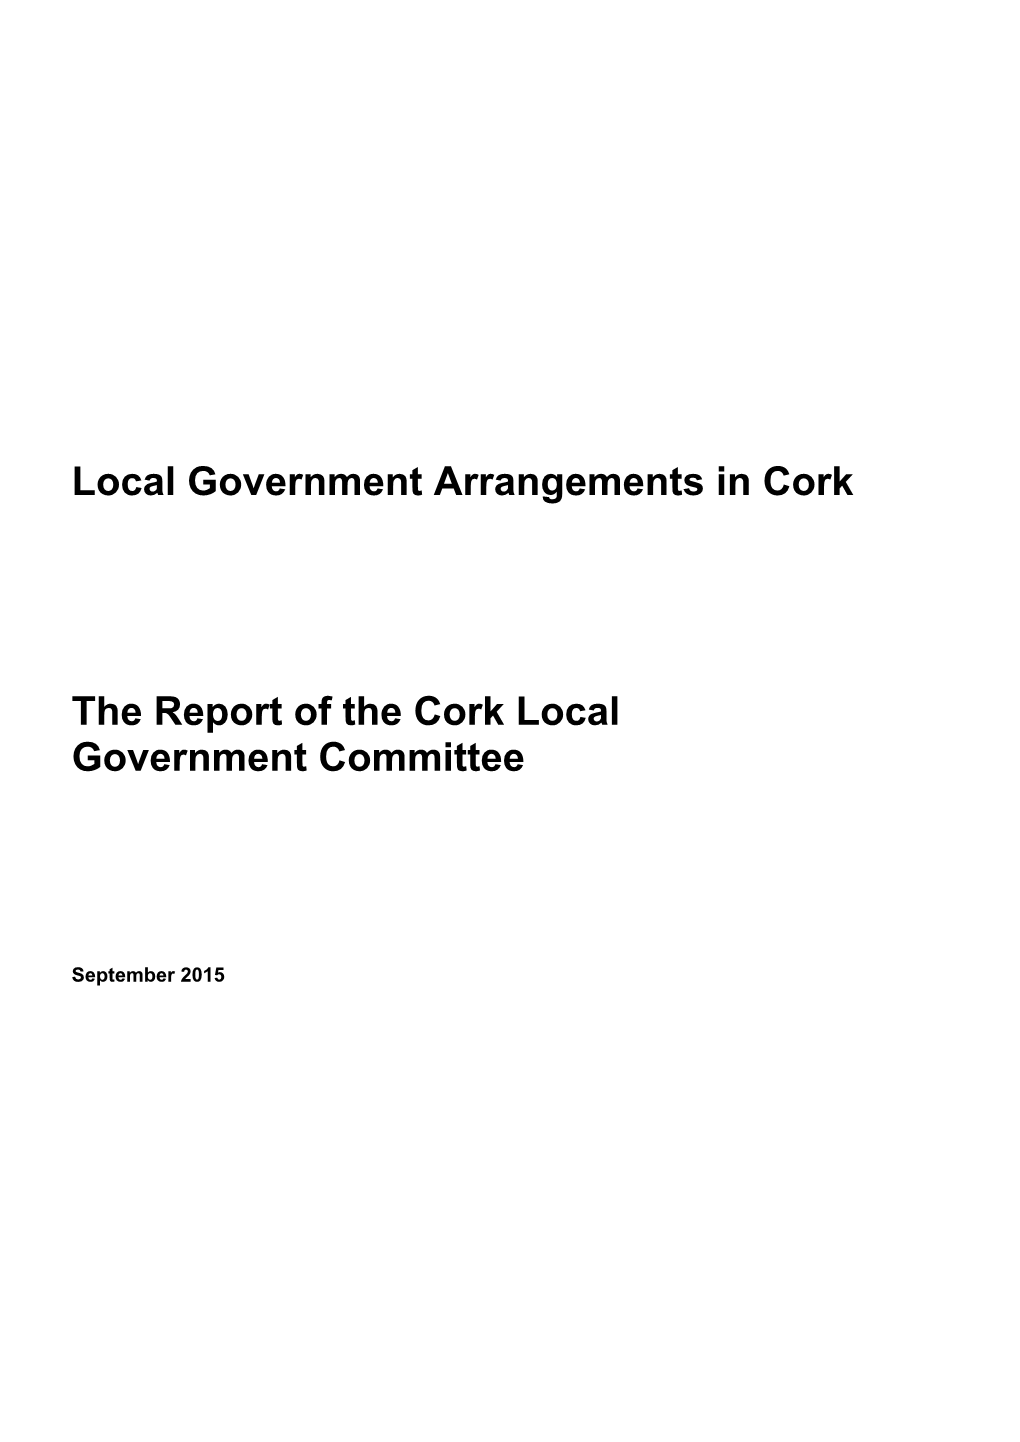 Local Government Arrangements in Cork the Report of the Cork Local